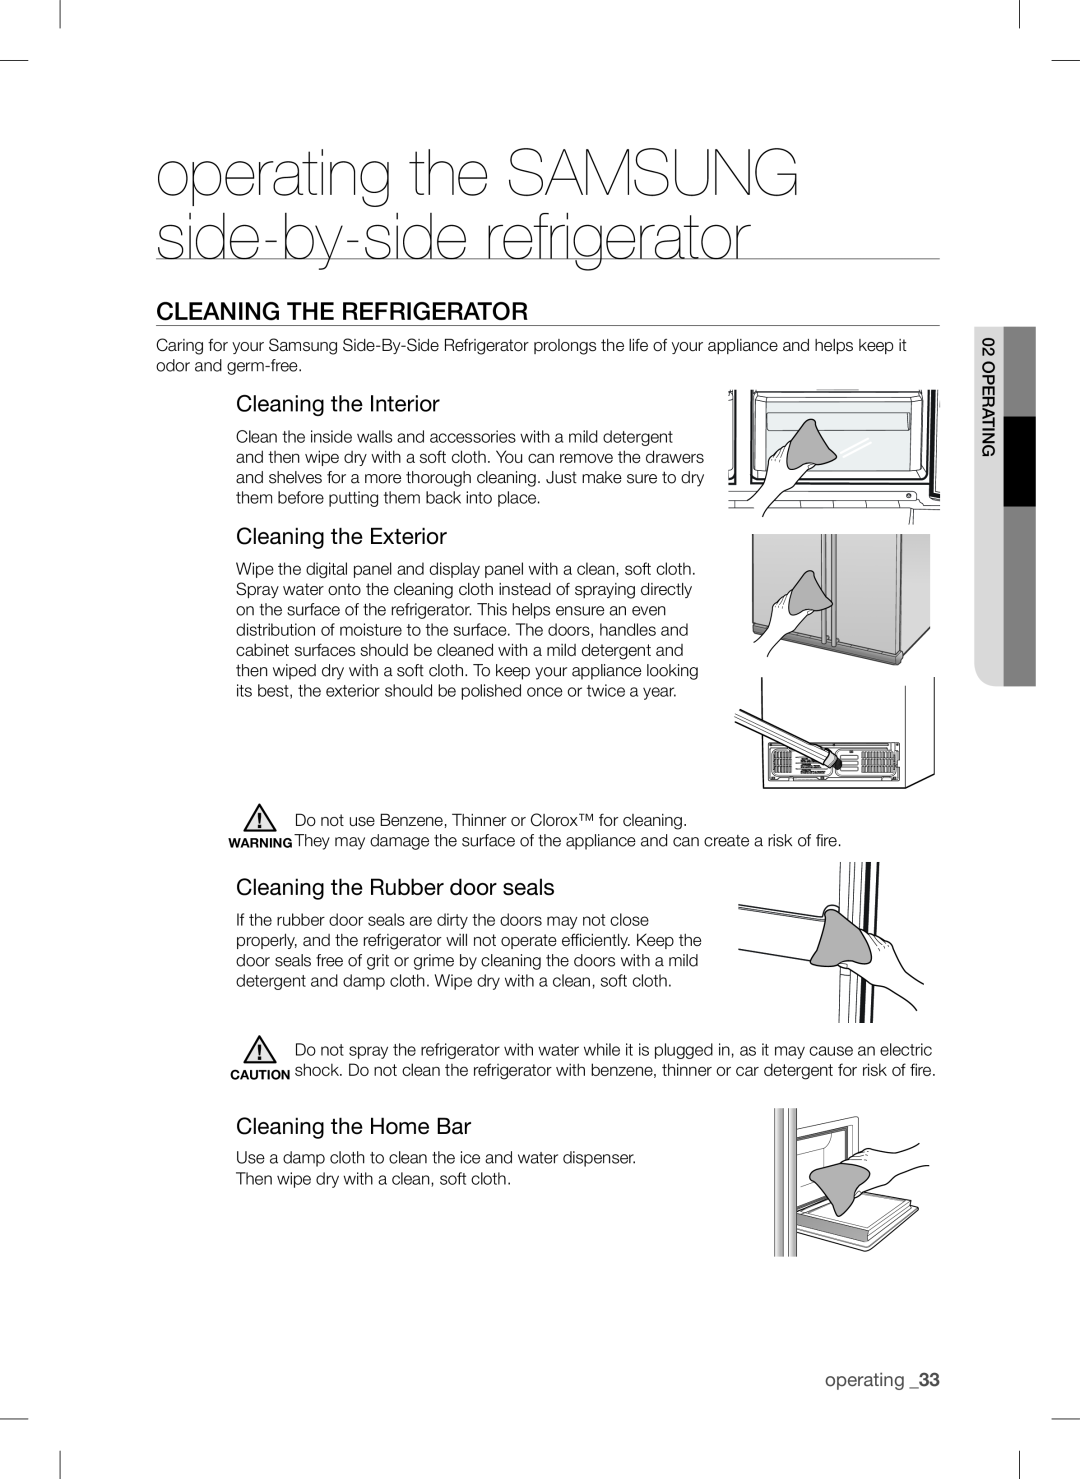 Samsung RSA1S*** Cleaning the refrigerator, Cleaning the Interior, Cleaning the Exterior, Cleaning the Rubber door seals 